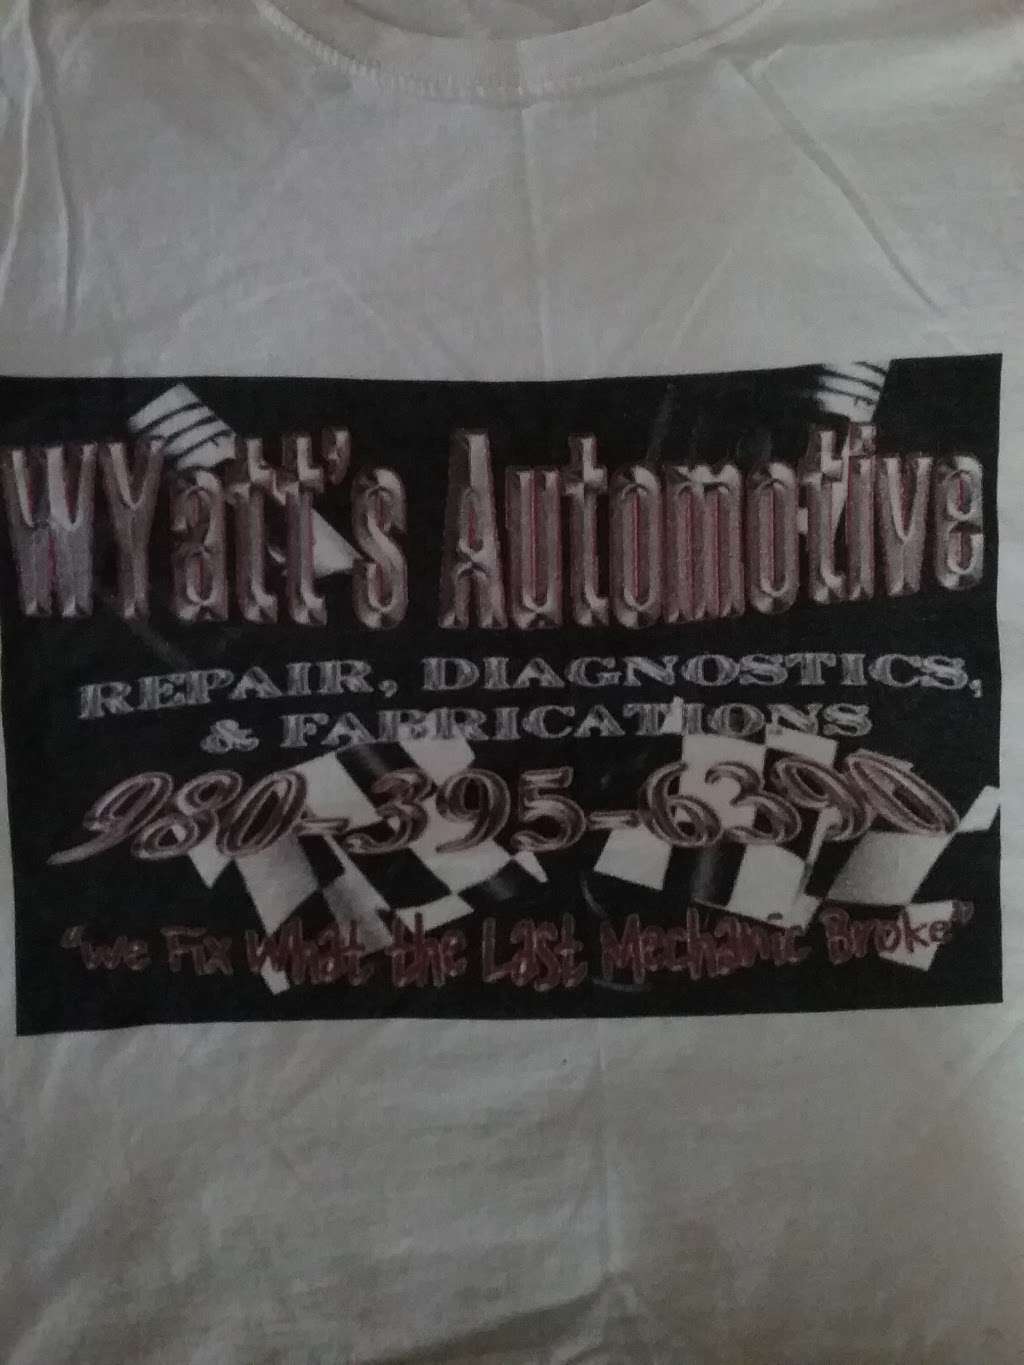 Wyatts Automotive Repair | 138 Family Ln, Mt Holly, NC 28120 | Phone: (980) 395-6390